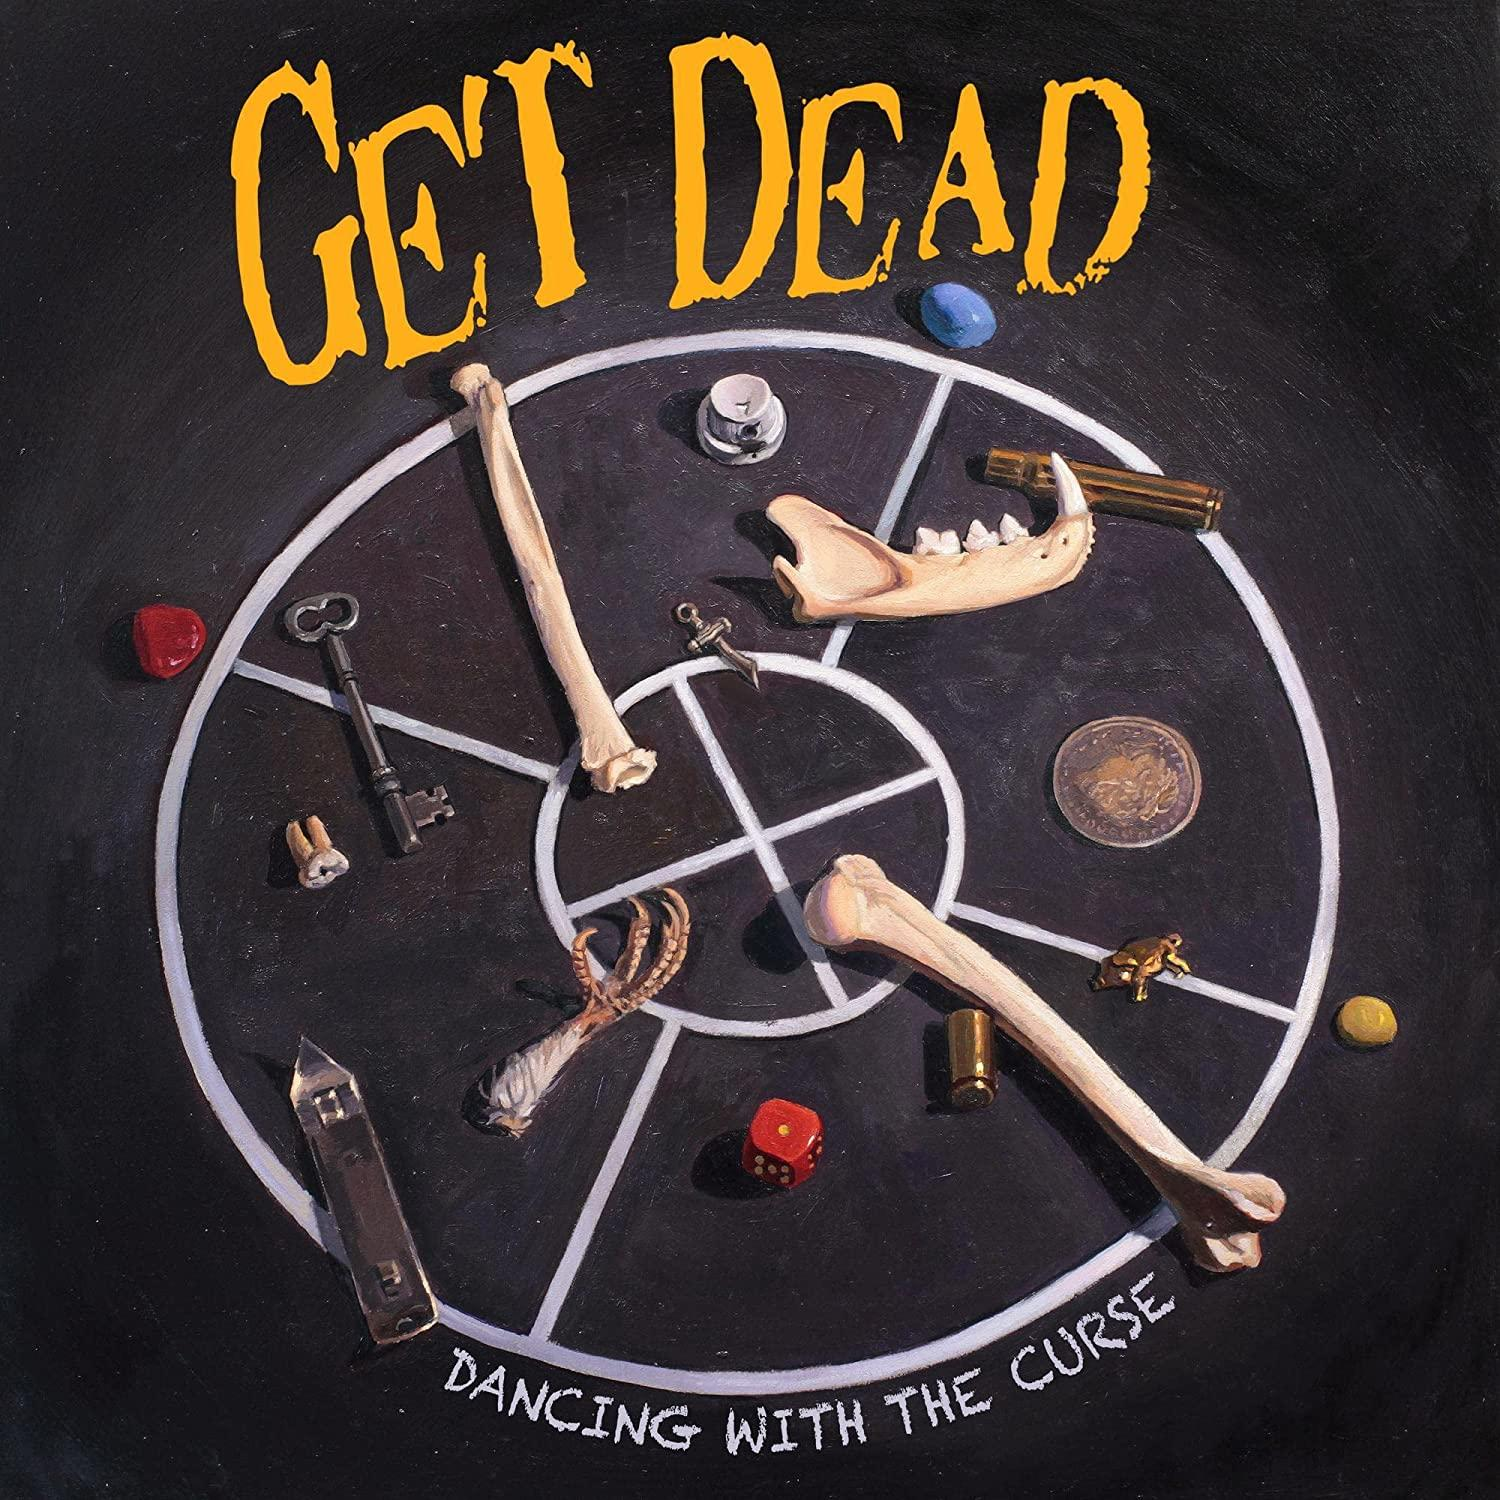 Get Dead - + Dancing The - With Curse (LP Download)